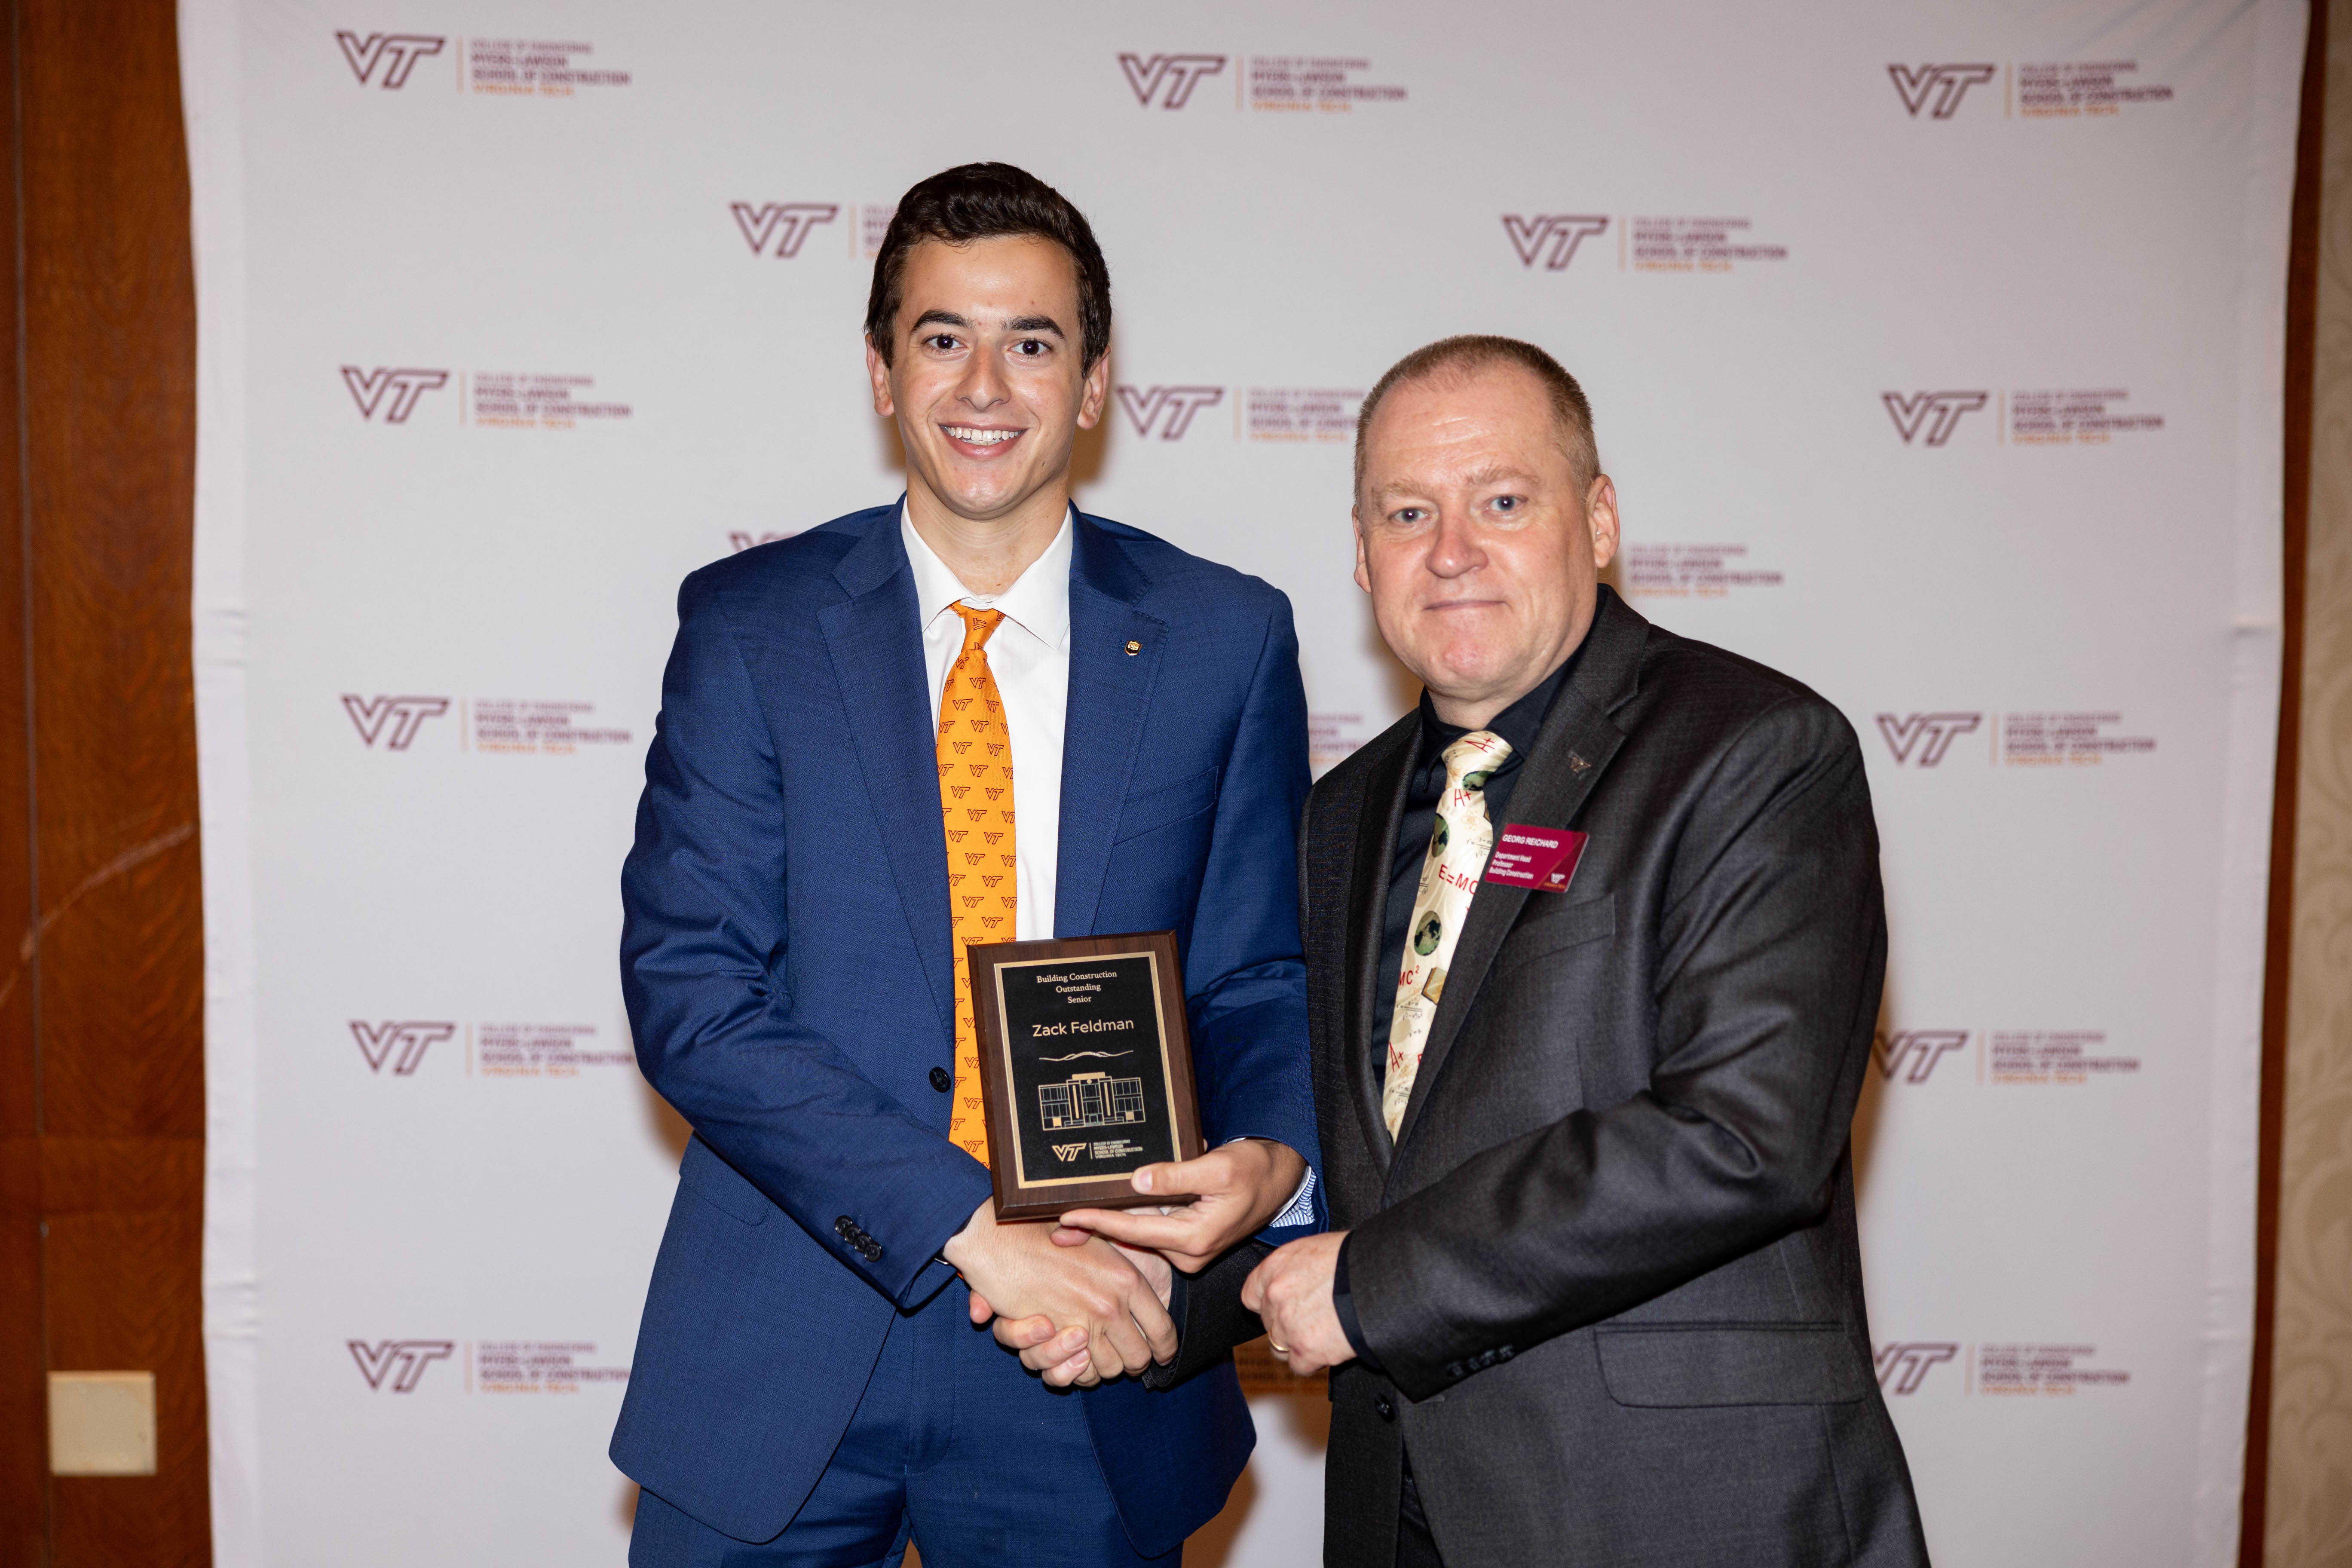 Zack Feldman (at left) and Georg Reichard. Photo by Will Drew for Virginia Tech.